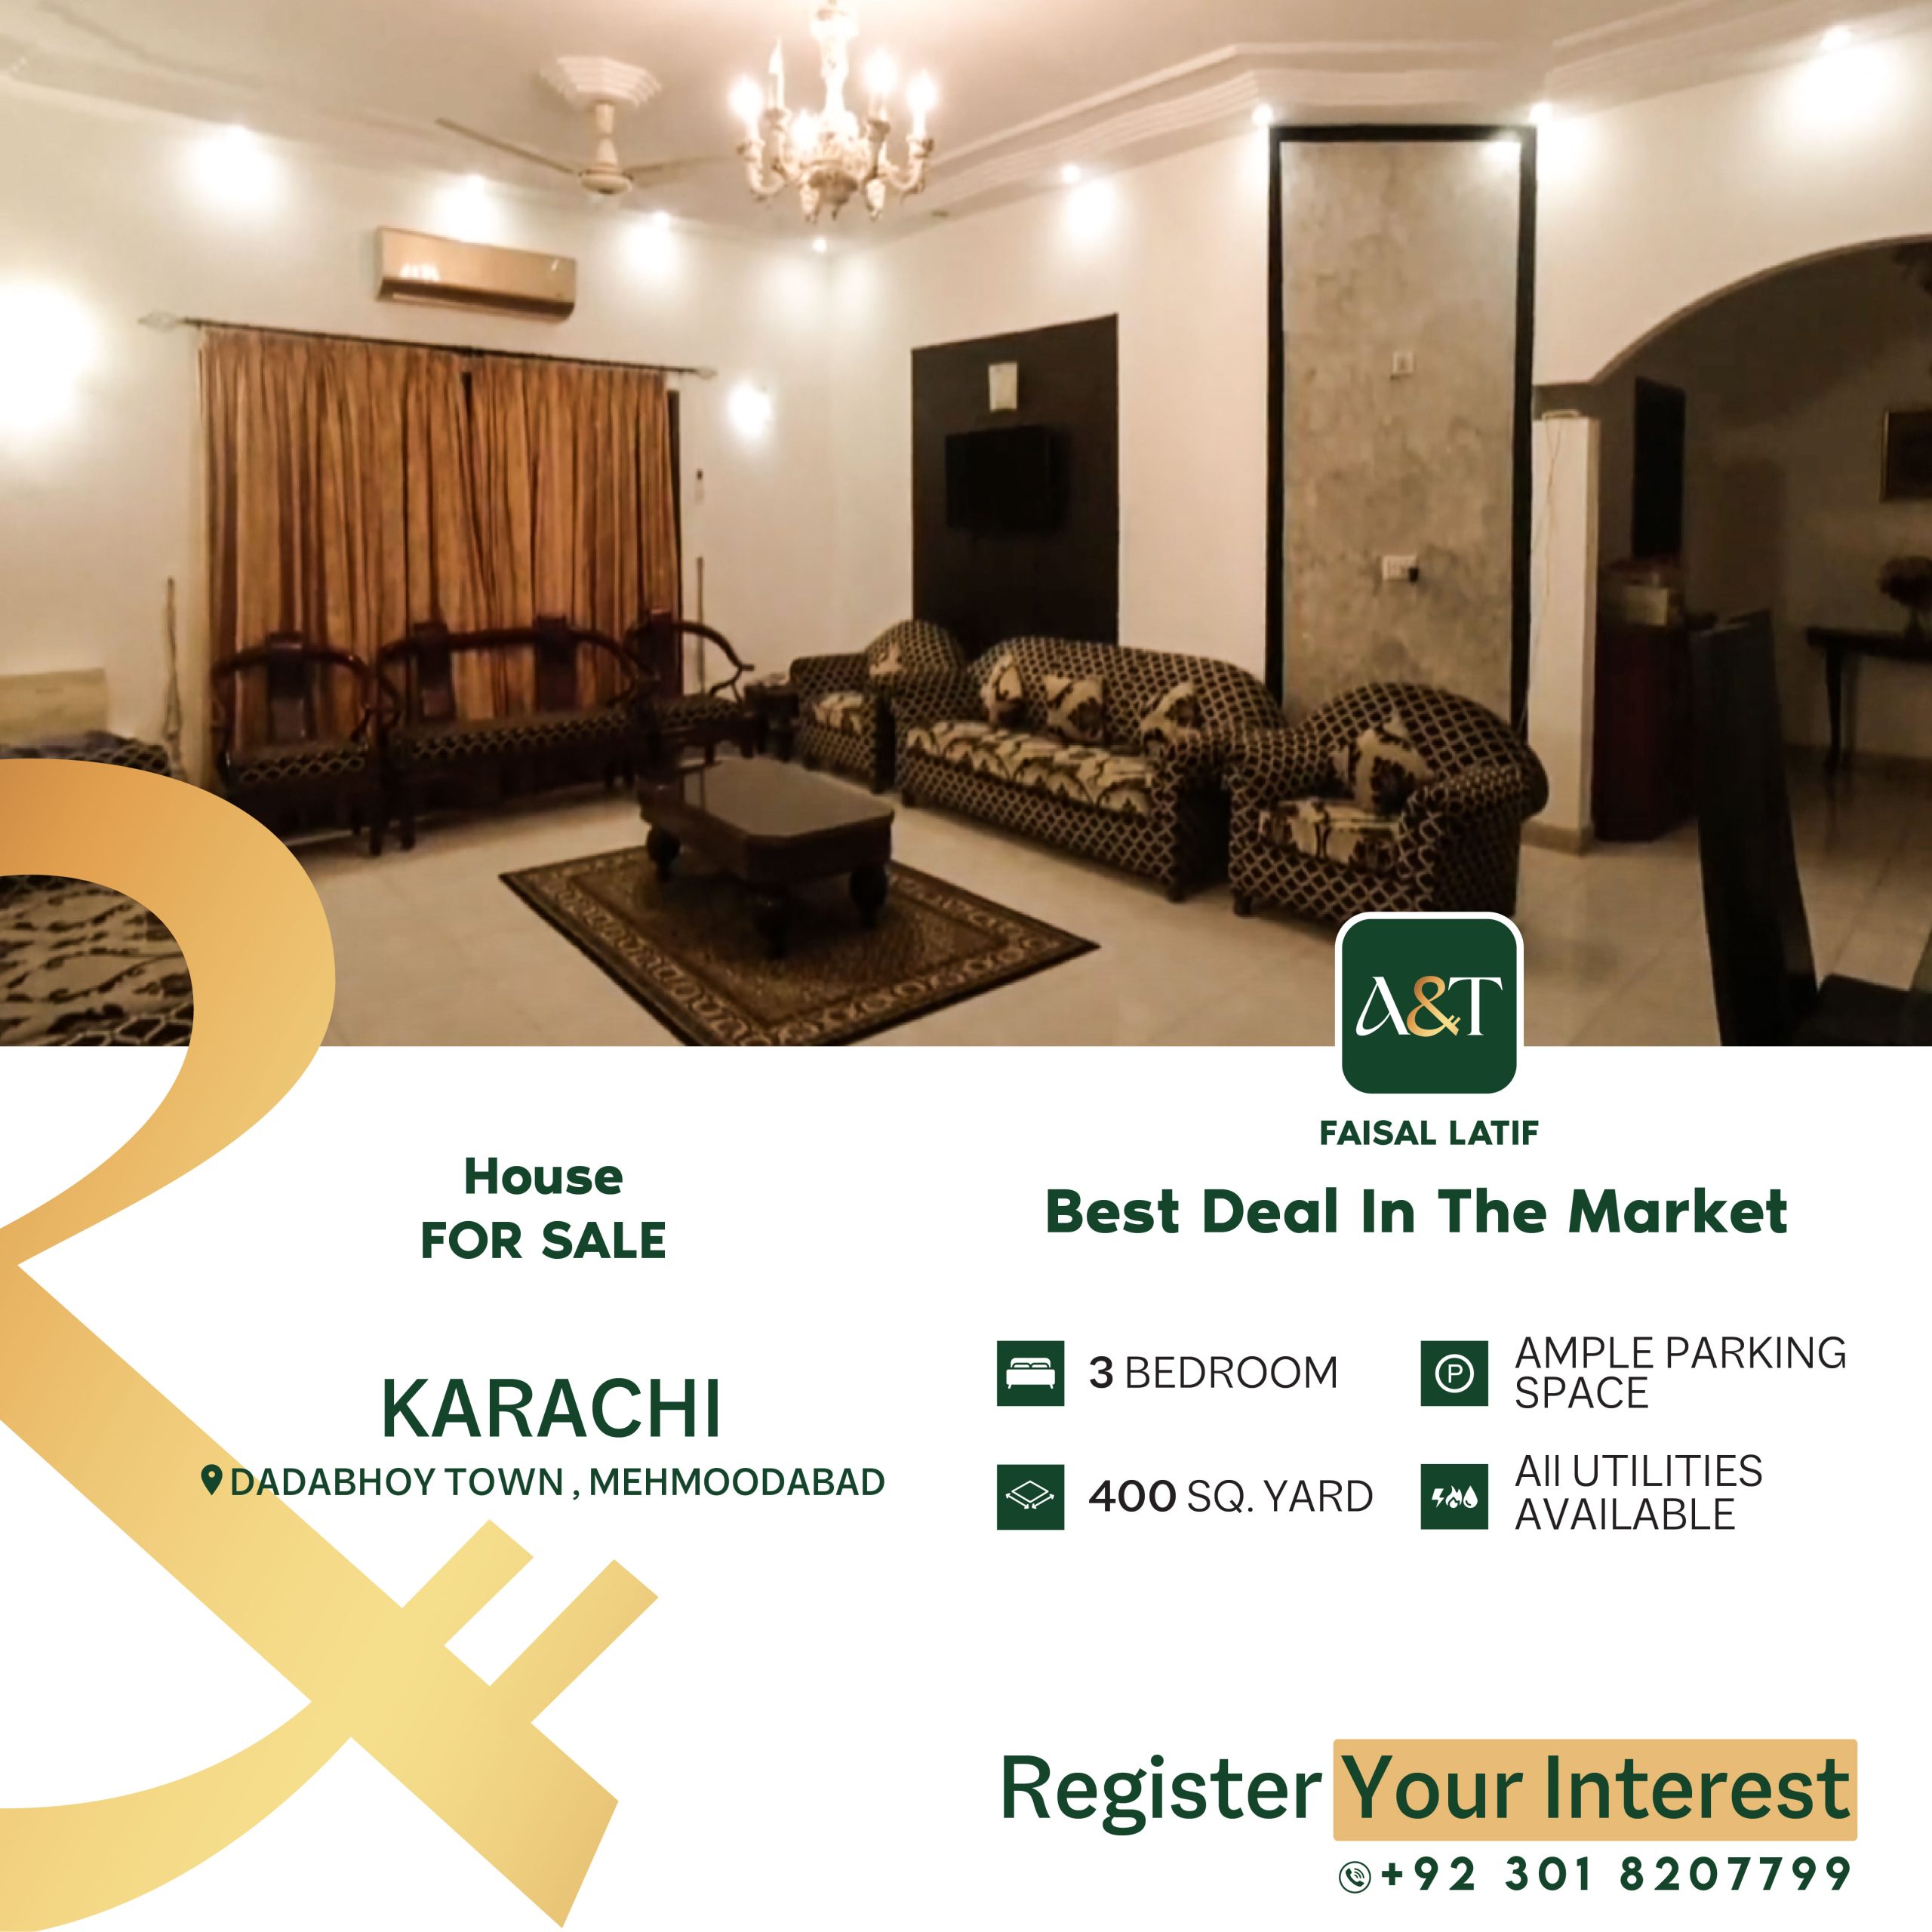 3BR House | Dadabhiy Town Mehmoodabad | For Sale